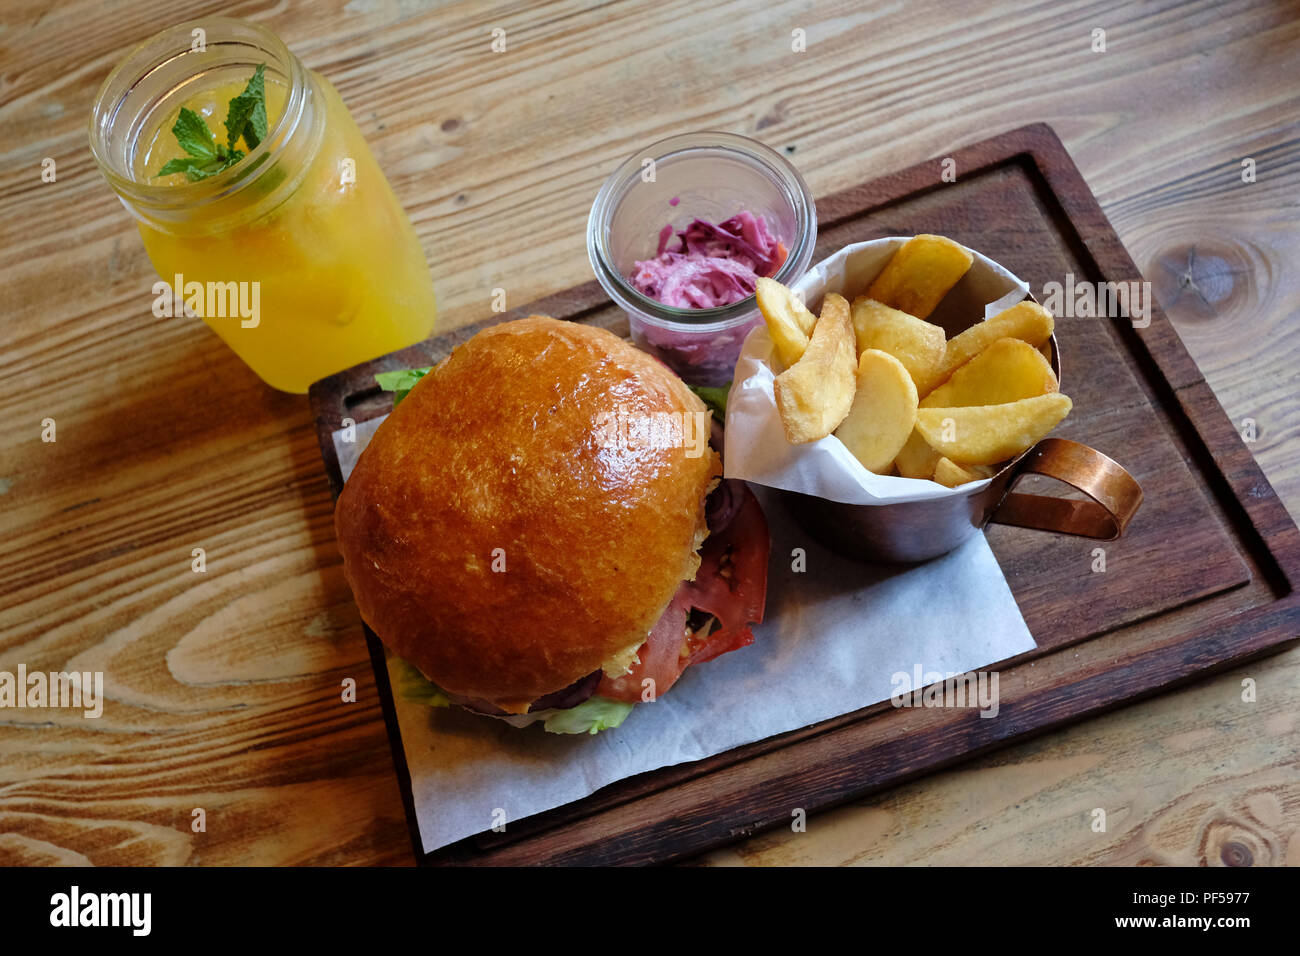 A dish of burger served with chips at Stol i Wolmeat meat restaurant in the  old town in the city of Lublin Eastern Poland Stock Photo - Alamy